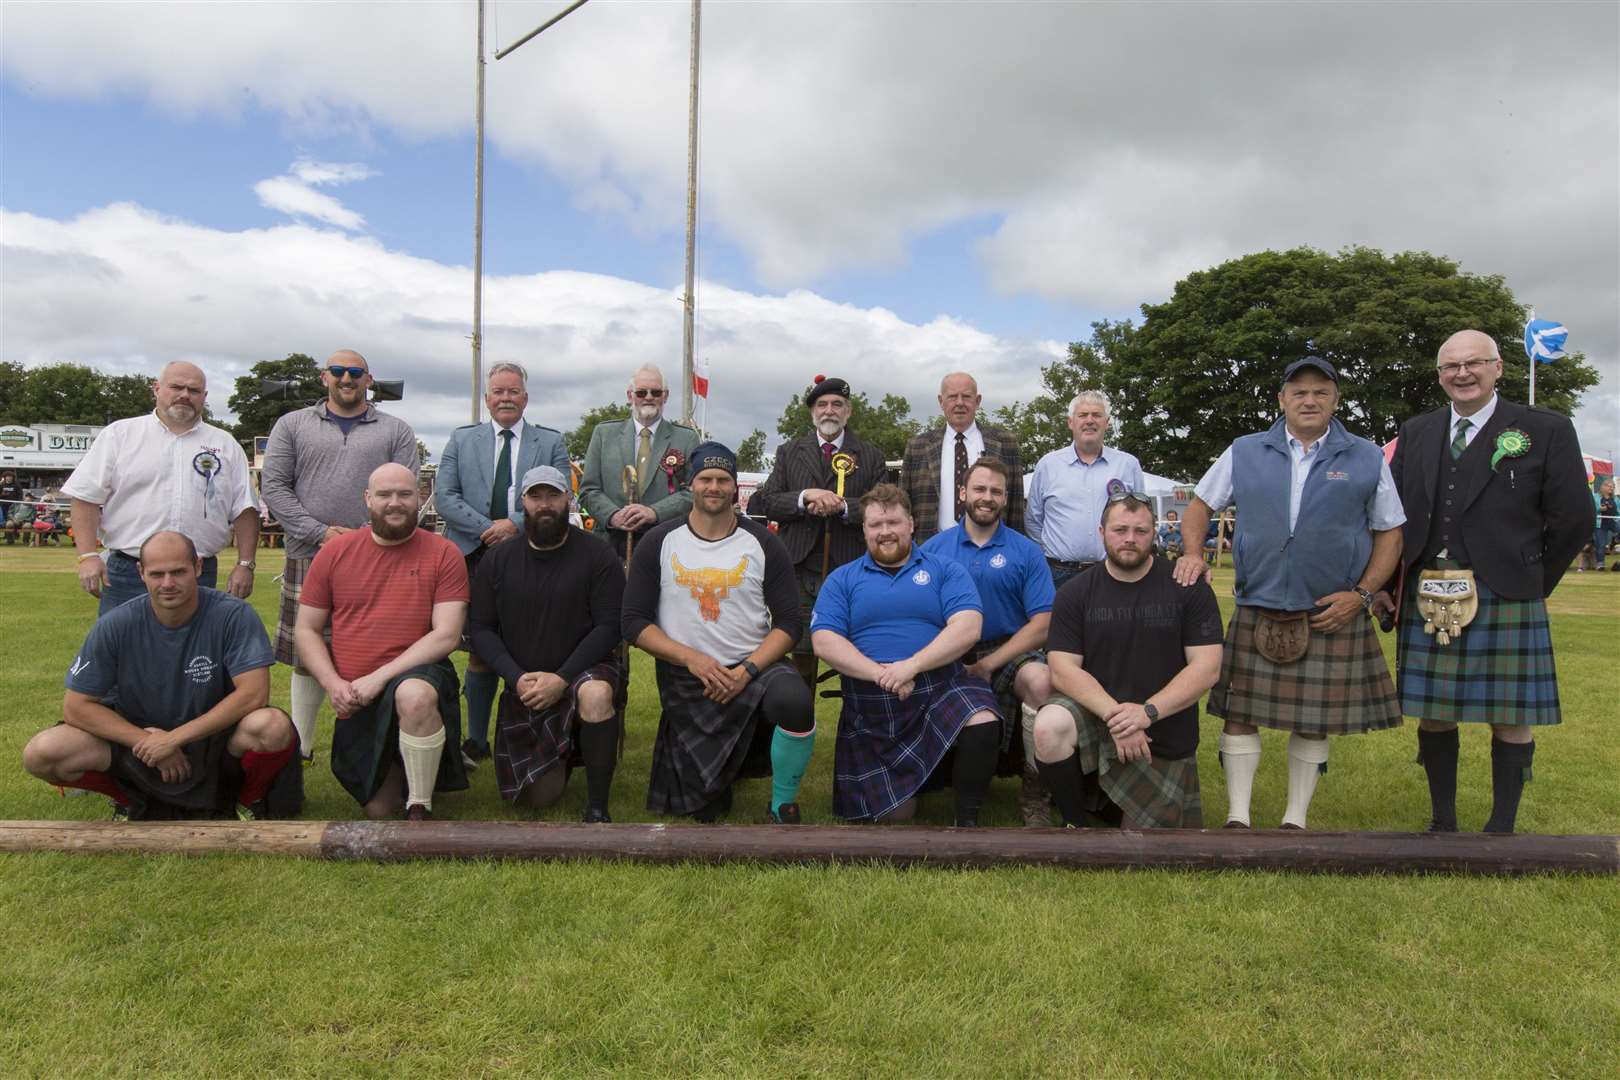 Heavy athletes and officials pose for a photograph along with games chieftain Lord Thurso (back, centre right) and president Alistair Swanson (back, fourth left). Picture: Robert MacDonald/Northern Studios